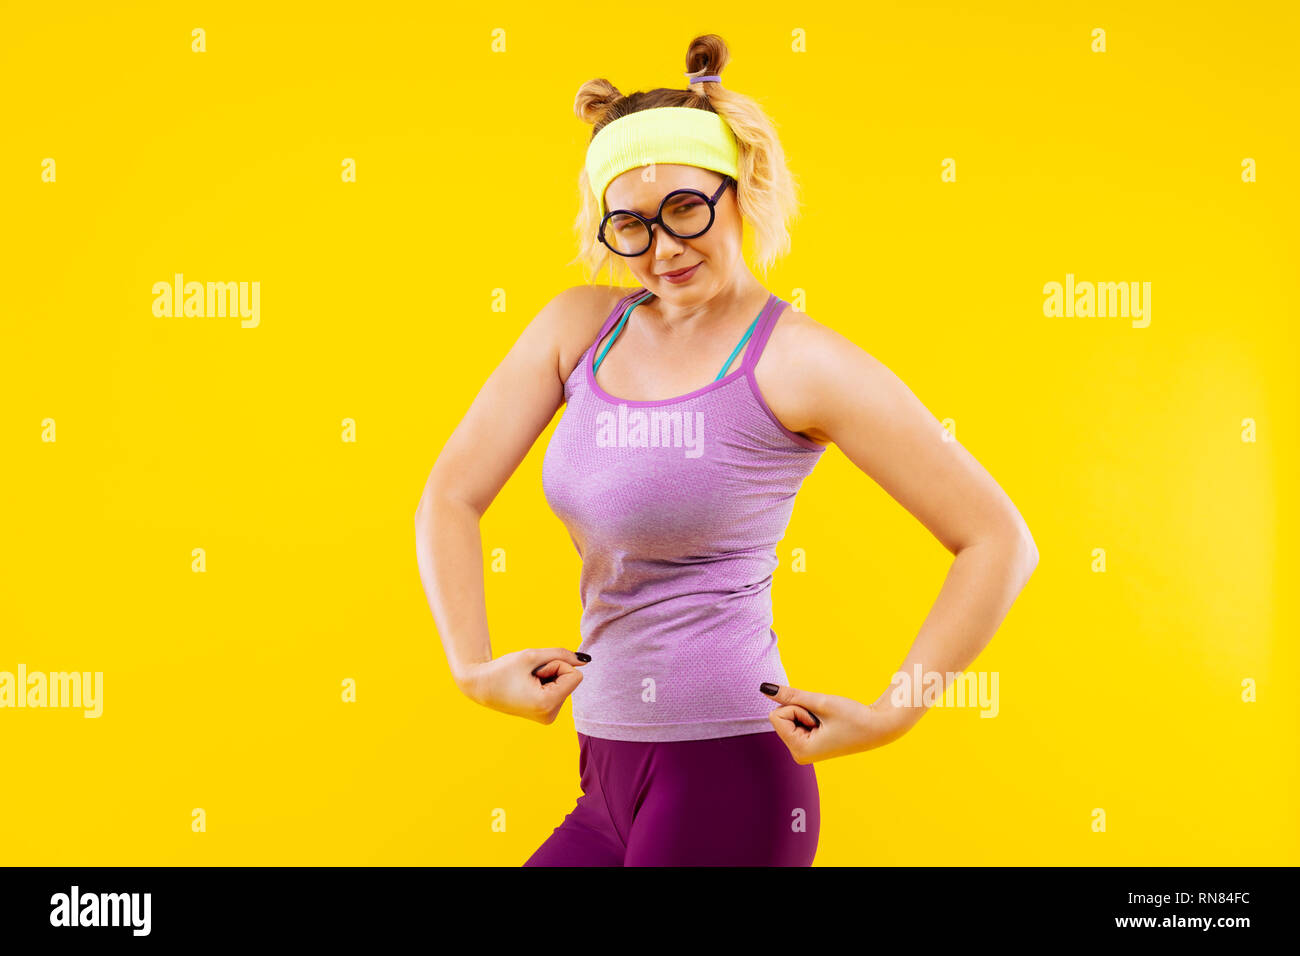 Woman wearing purple leggings and camisole showing strength Stock Photo